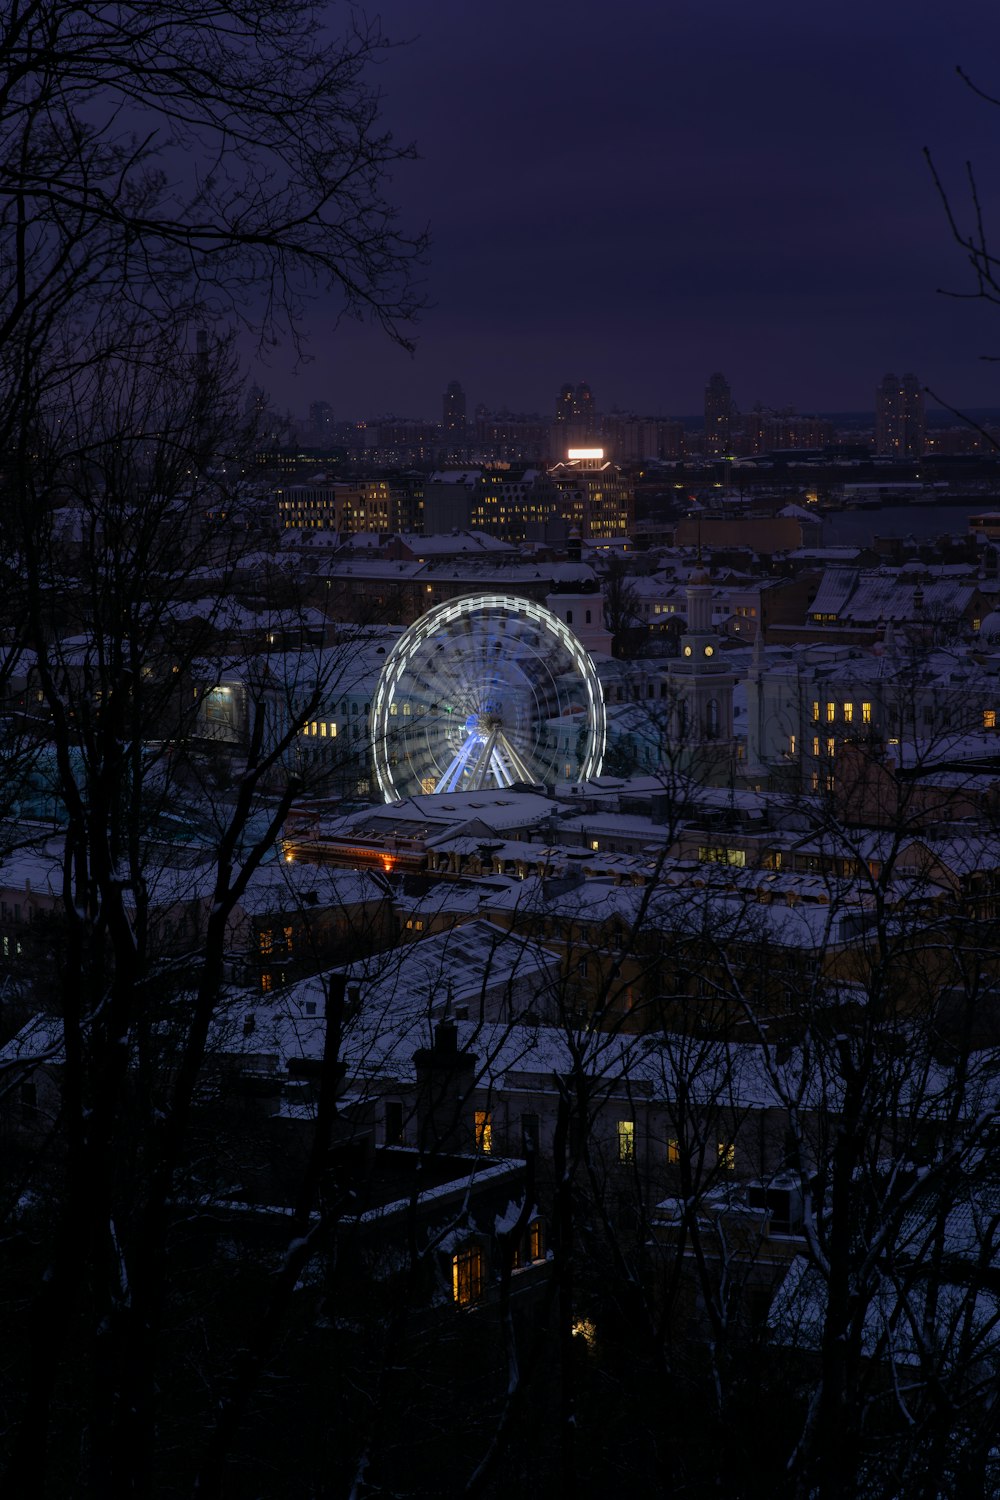 a ferris wheel in the middle of a city at night